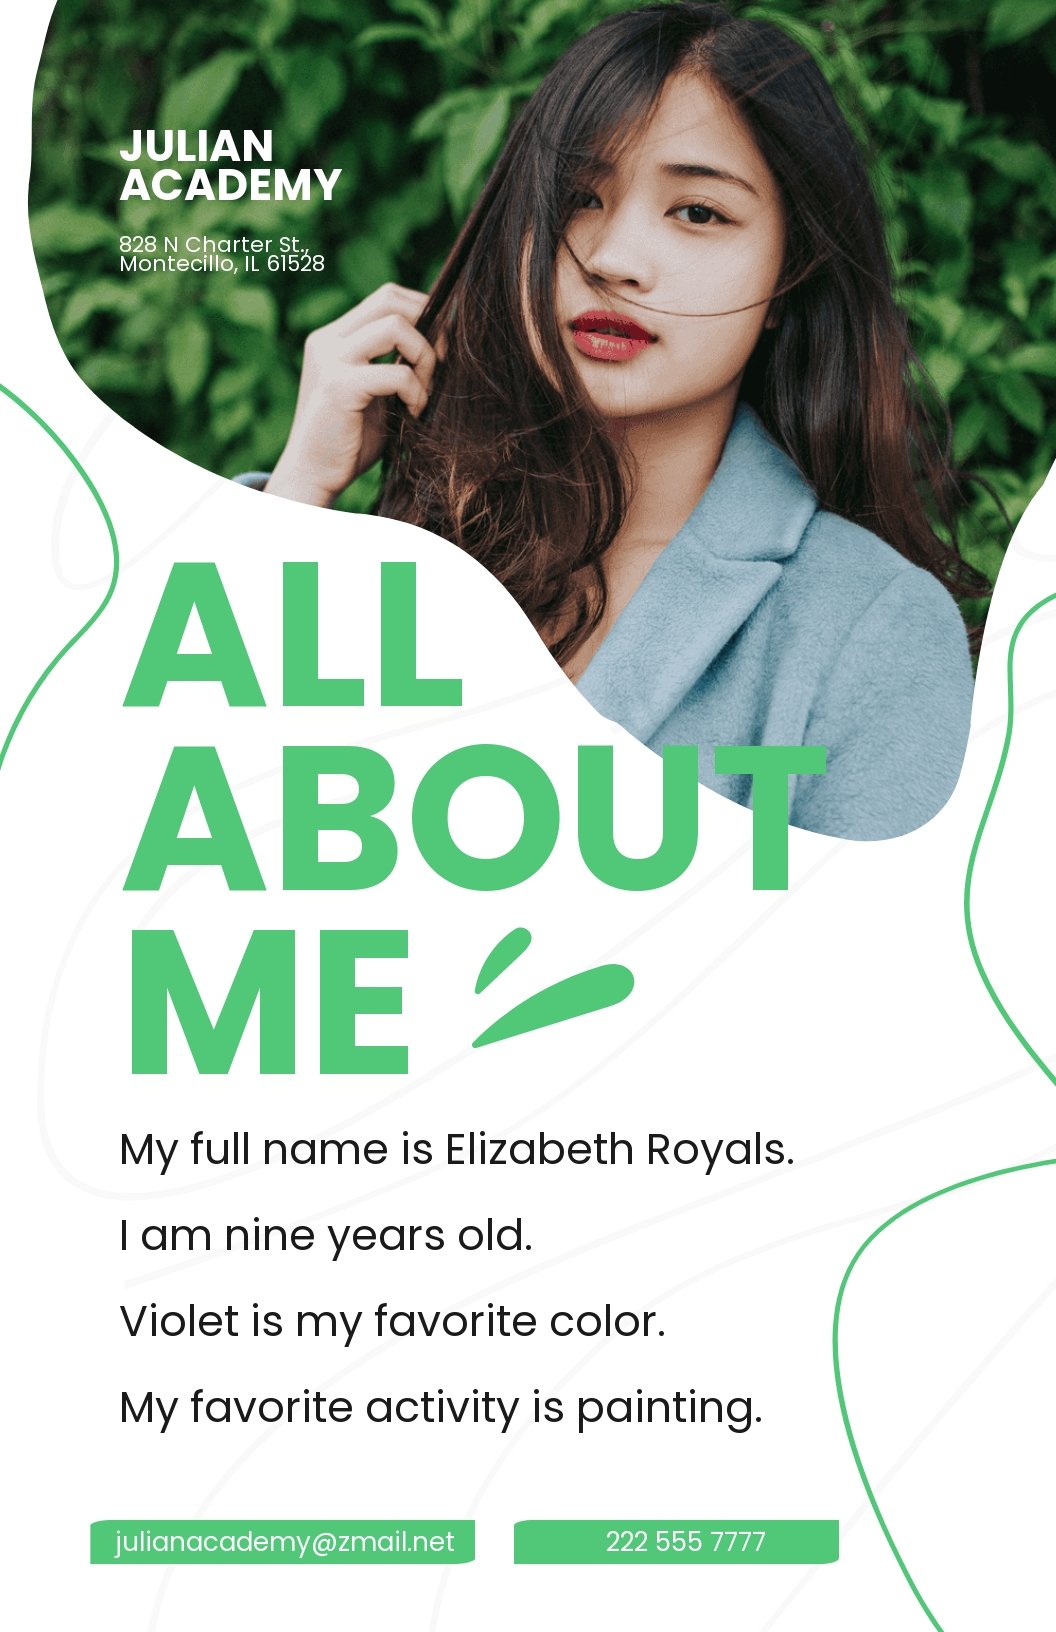 Simple All About Me Poster